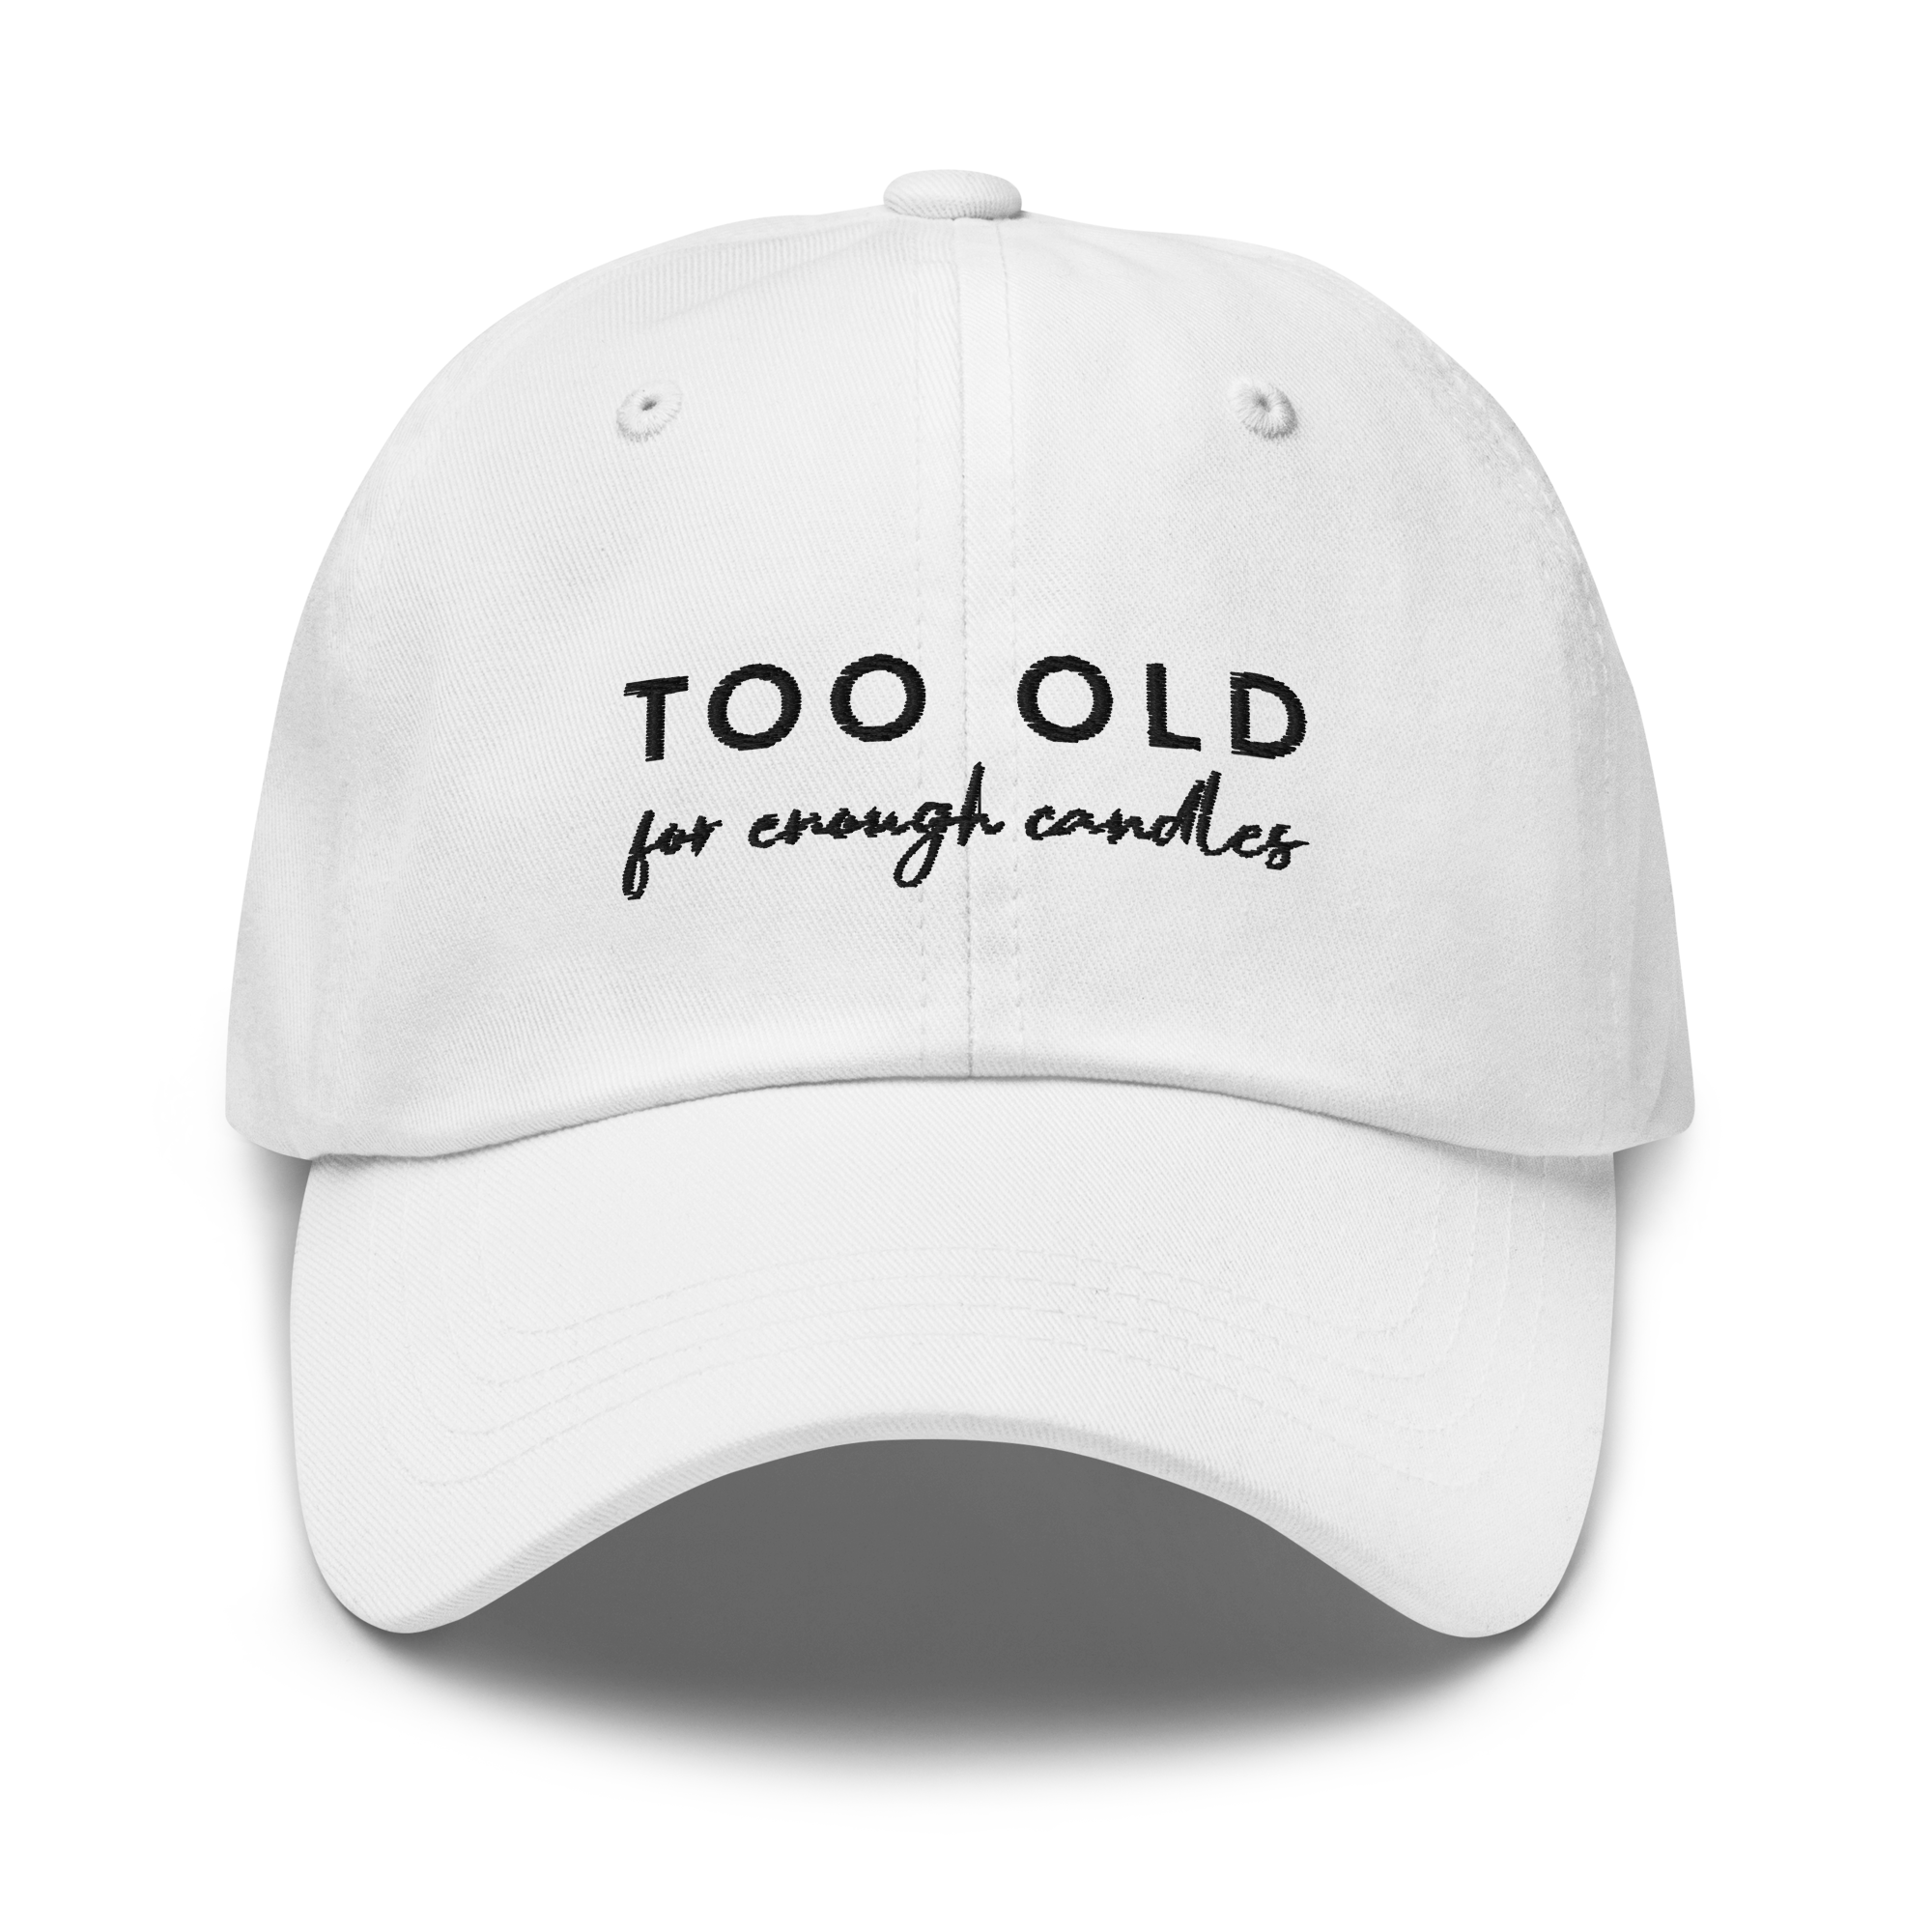 Too old for enough candles Cap